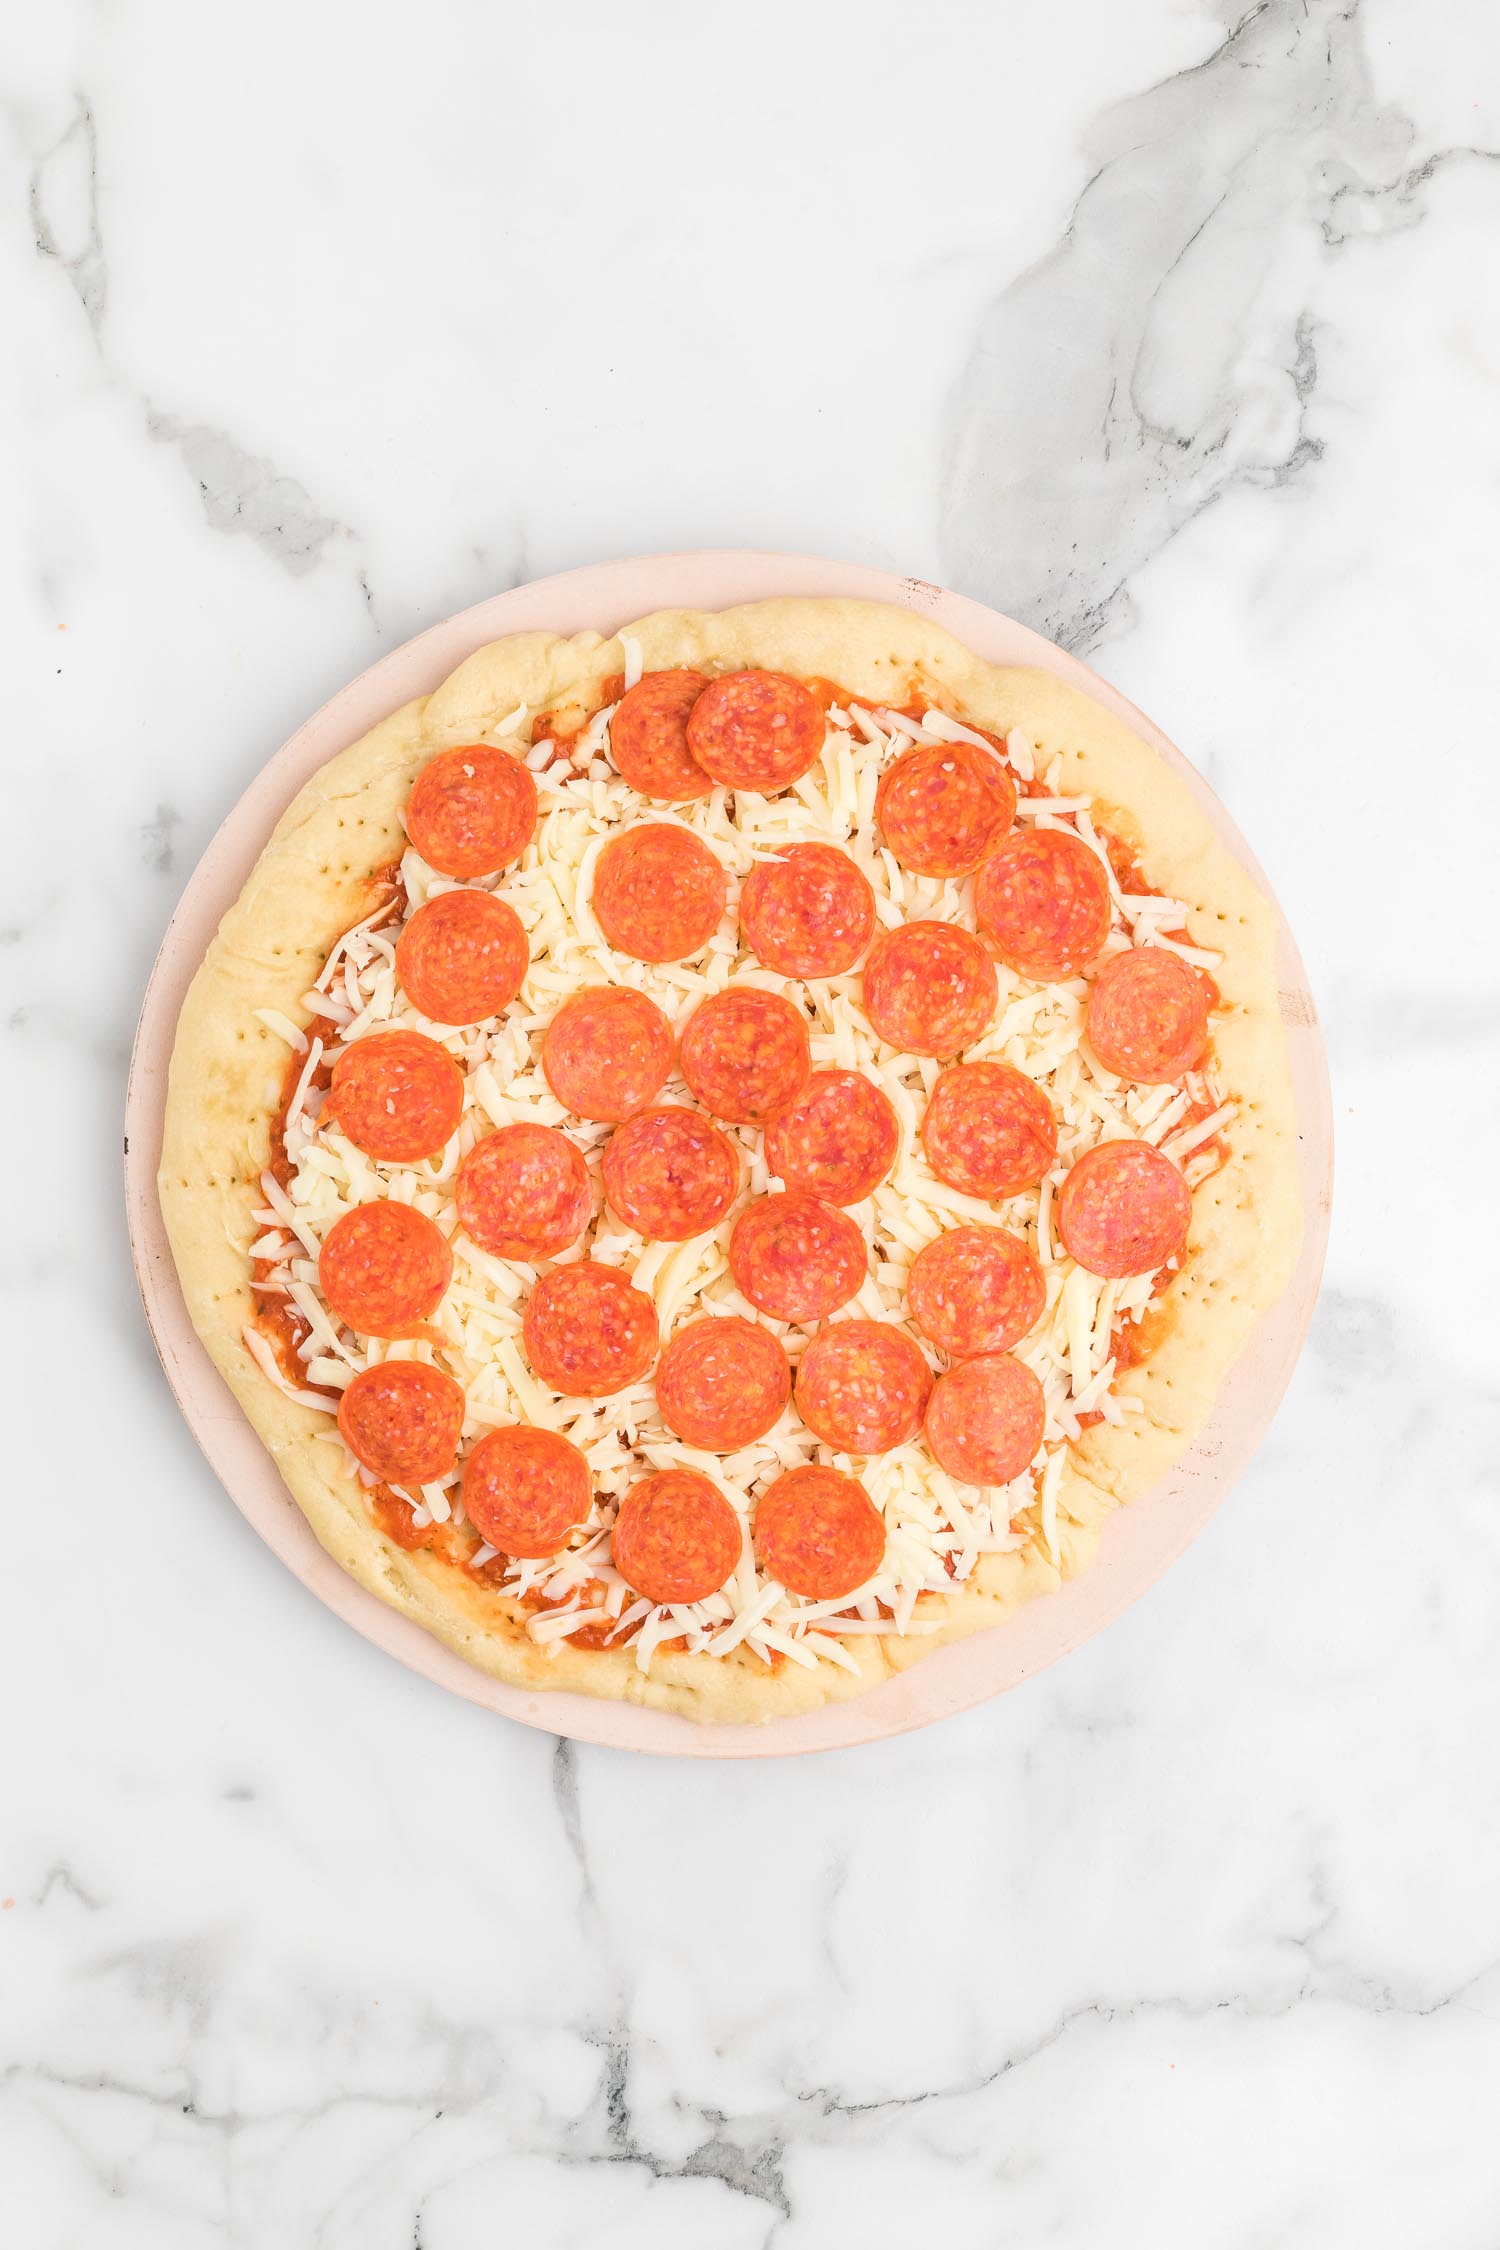 A whole pepperoni pizza on top of a pizza stone on a marble countertop.